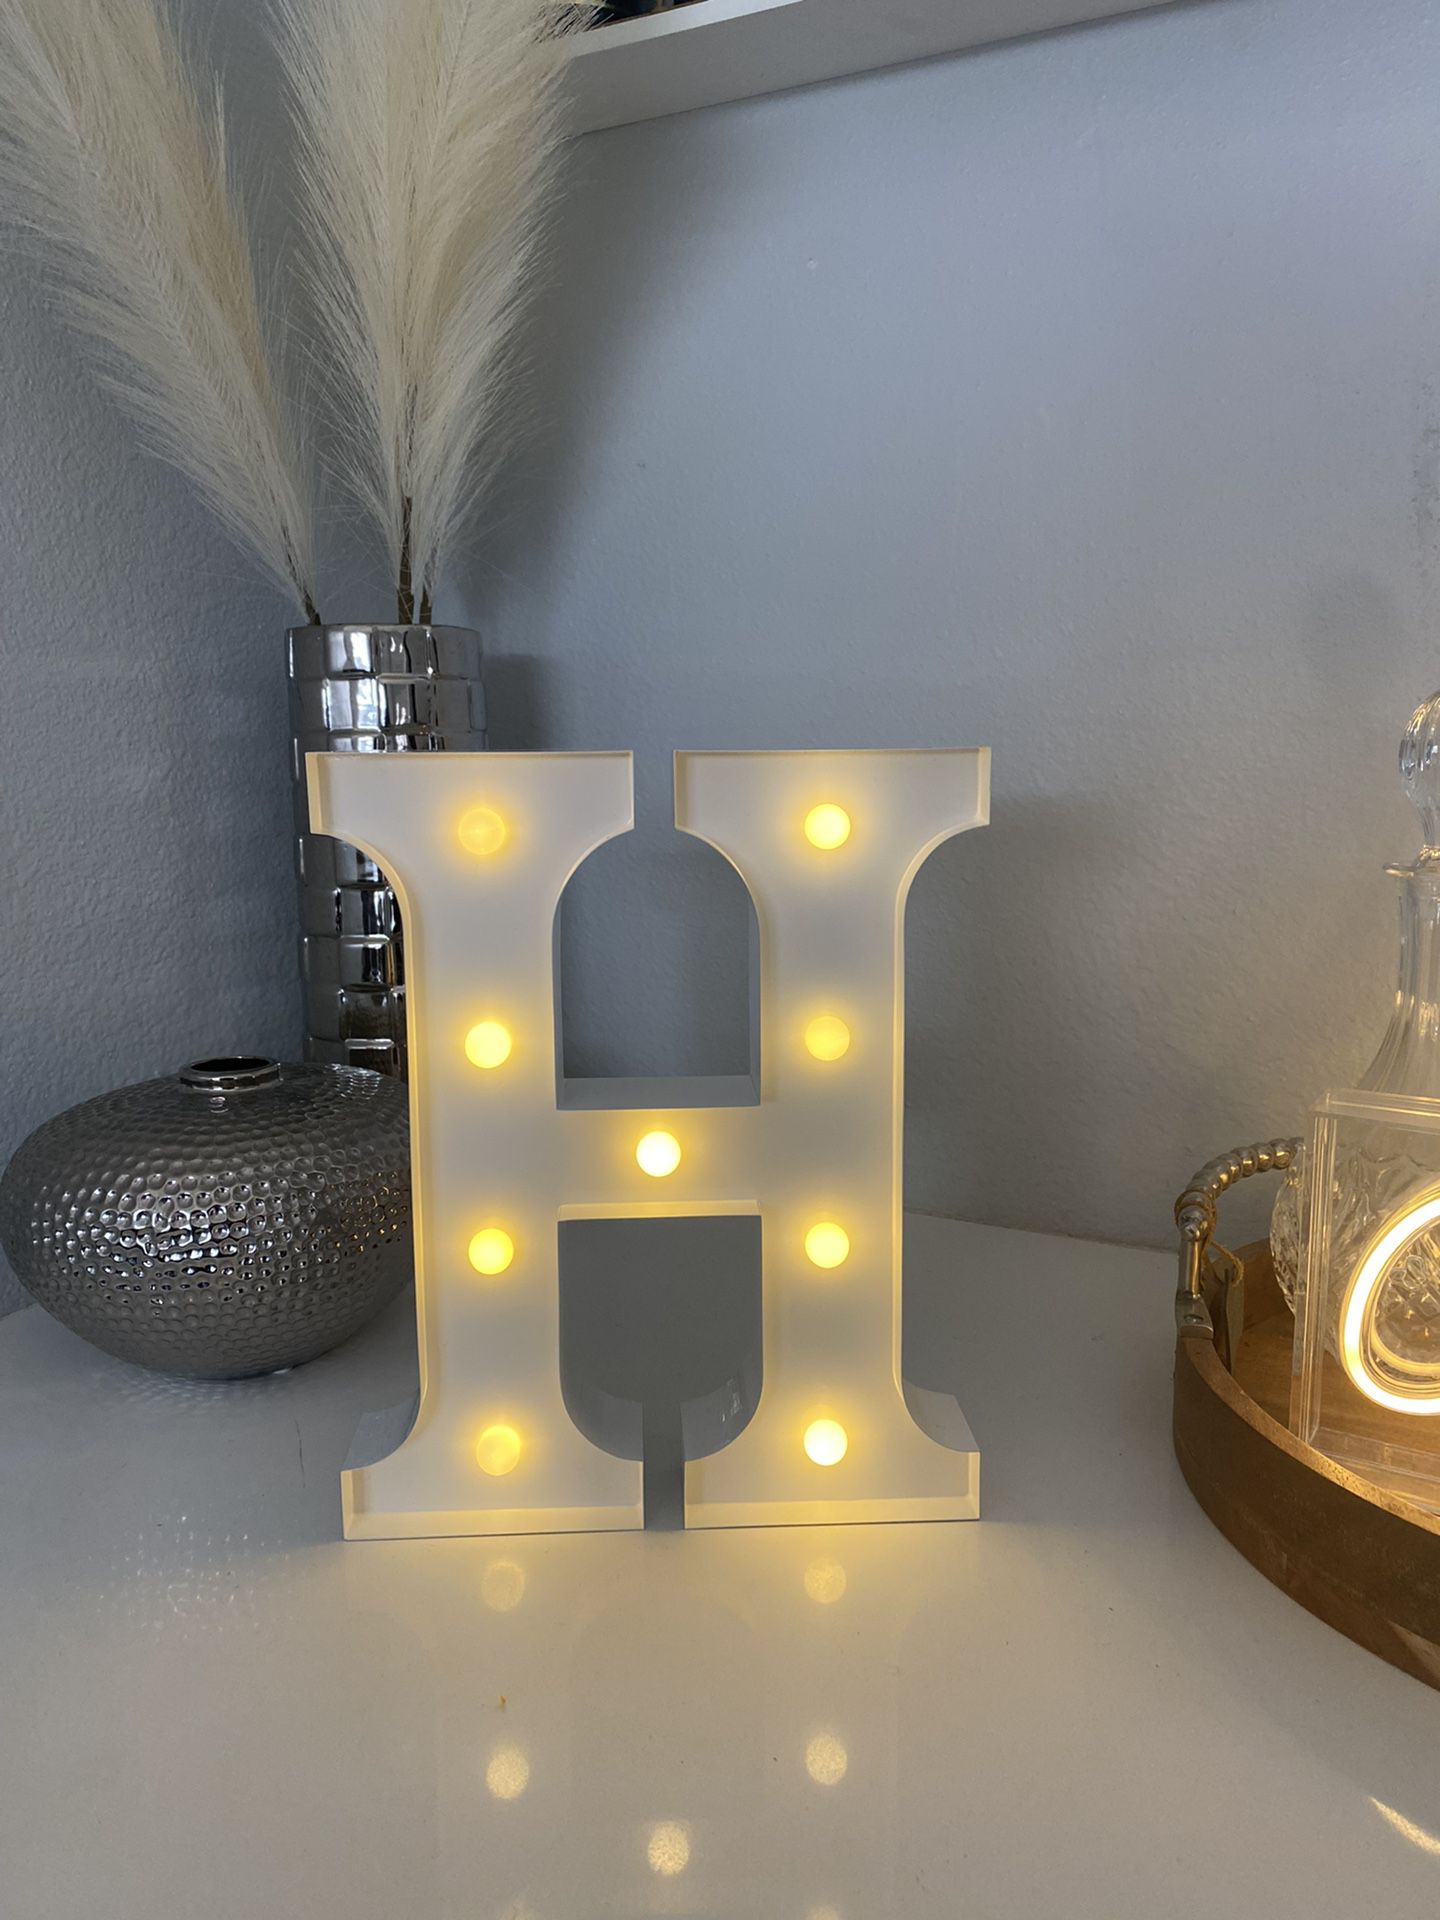 Marquee Letter “H”